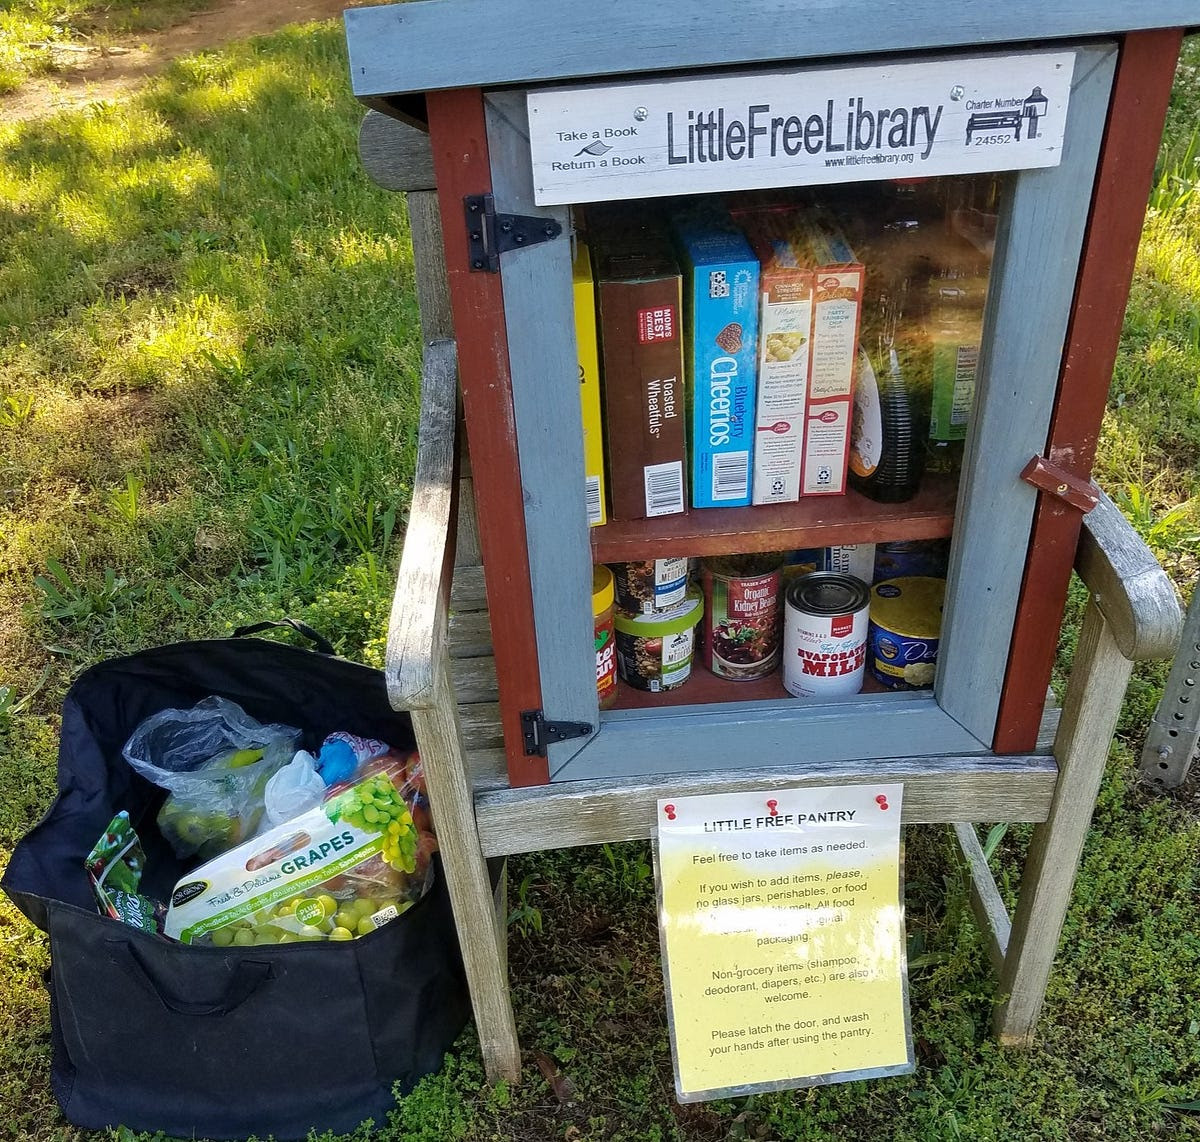 Little Free Library converted to Little Free Pantry during COVID near Charlottesville, VA